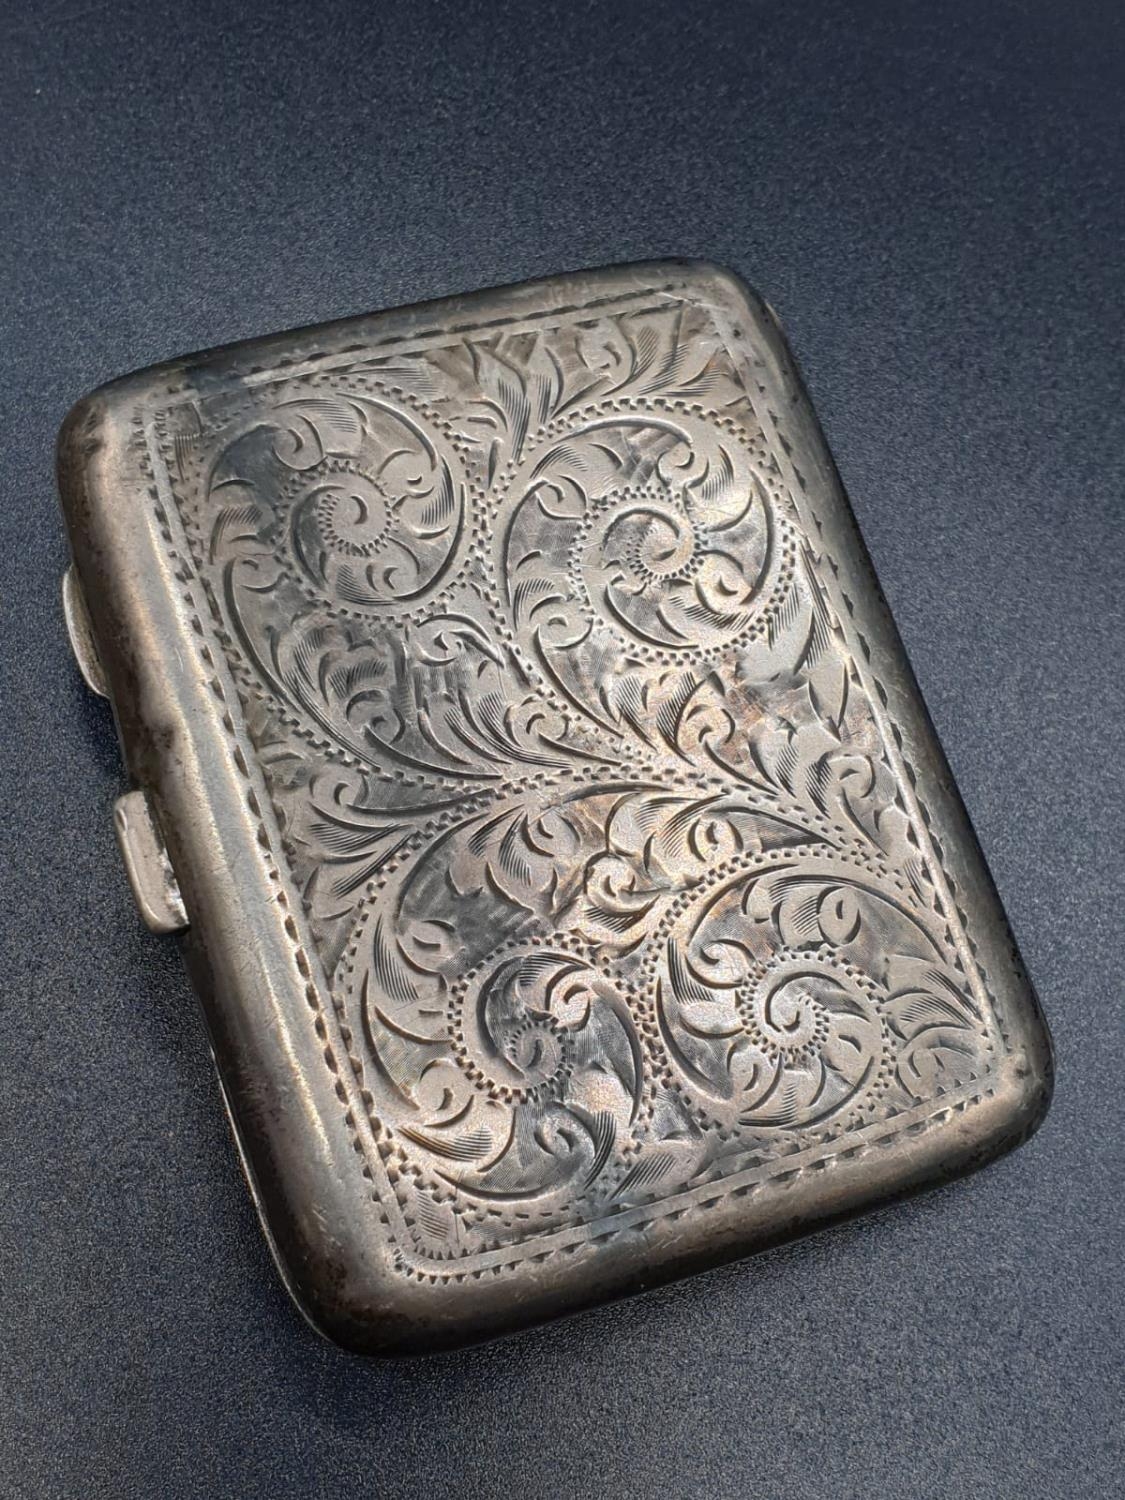 A Birmingham 1919 Hallmarked Silver Cigarette Case. Engraved decoration. A few signs of wear. A/F. - Image 5 of 7